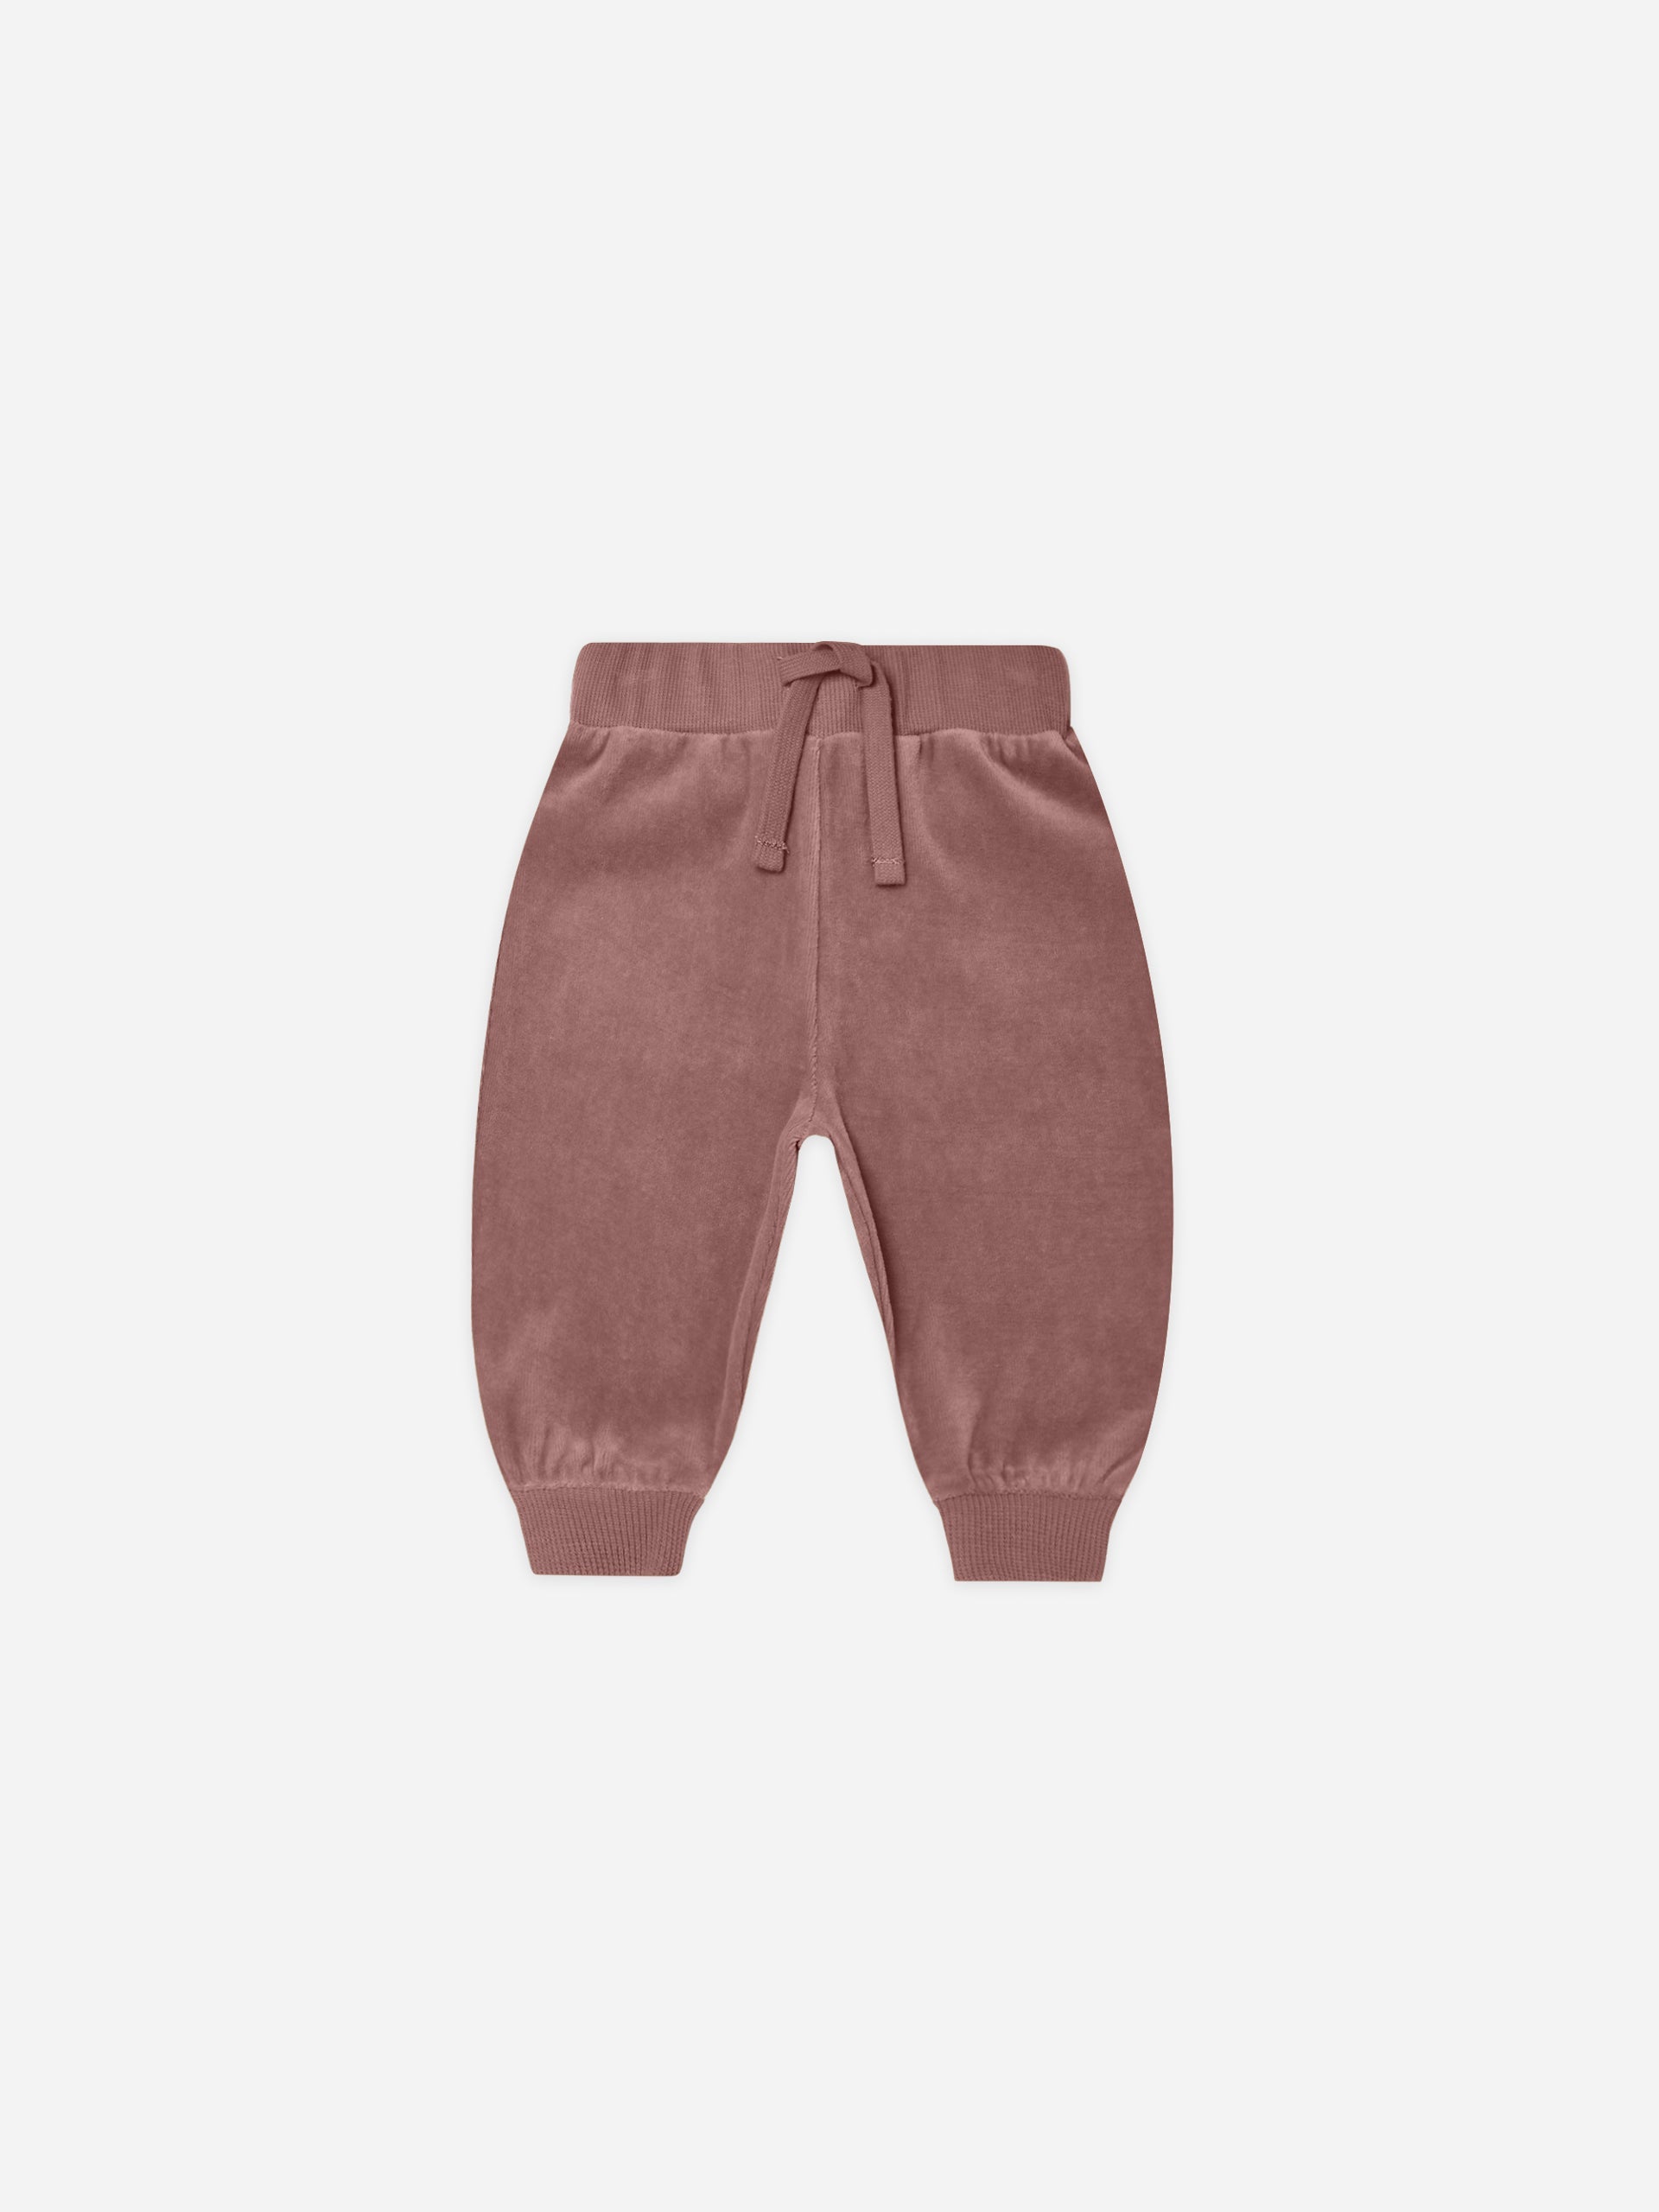 Velour Relaxed Sweatpant || Fig - Rylee + Cru | Kids Clothes | Trendy Baby Clothes | Modern Infant Outfits |